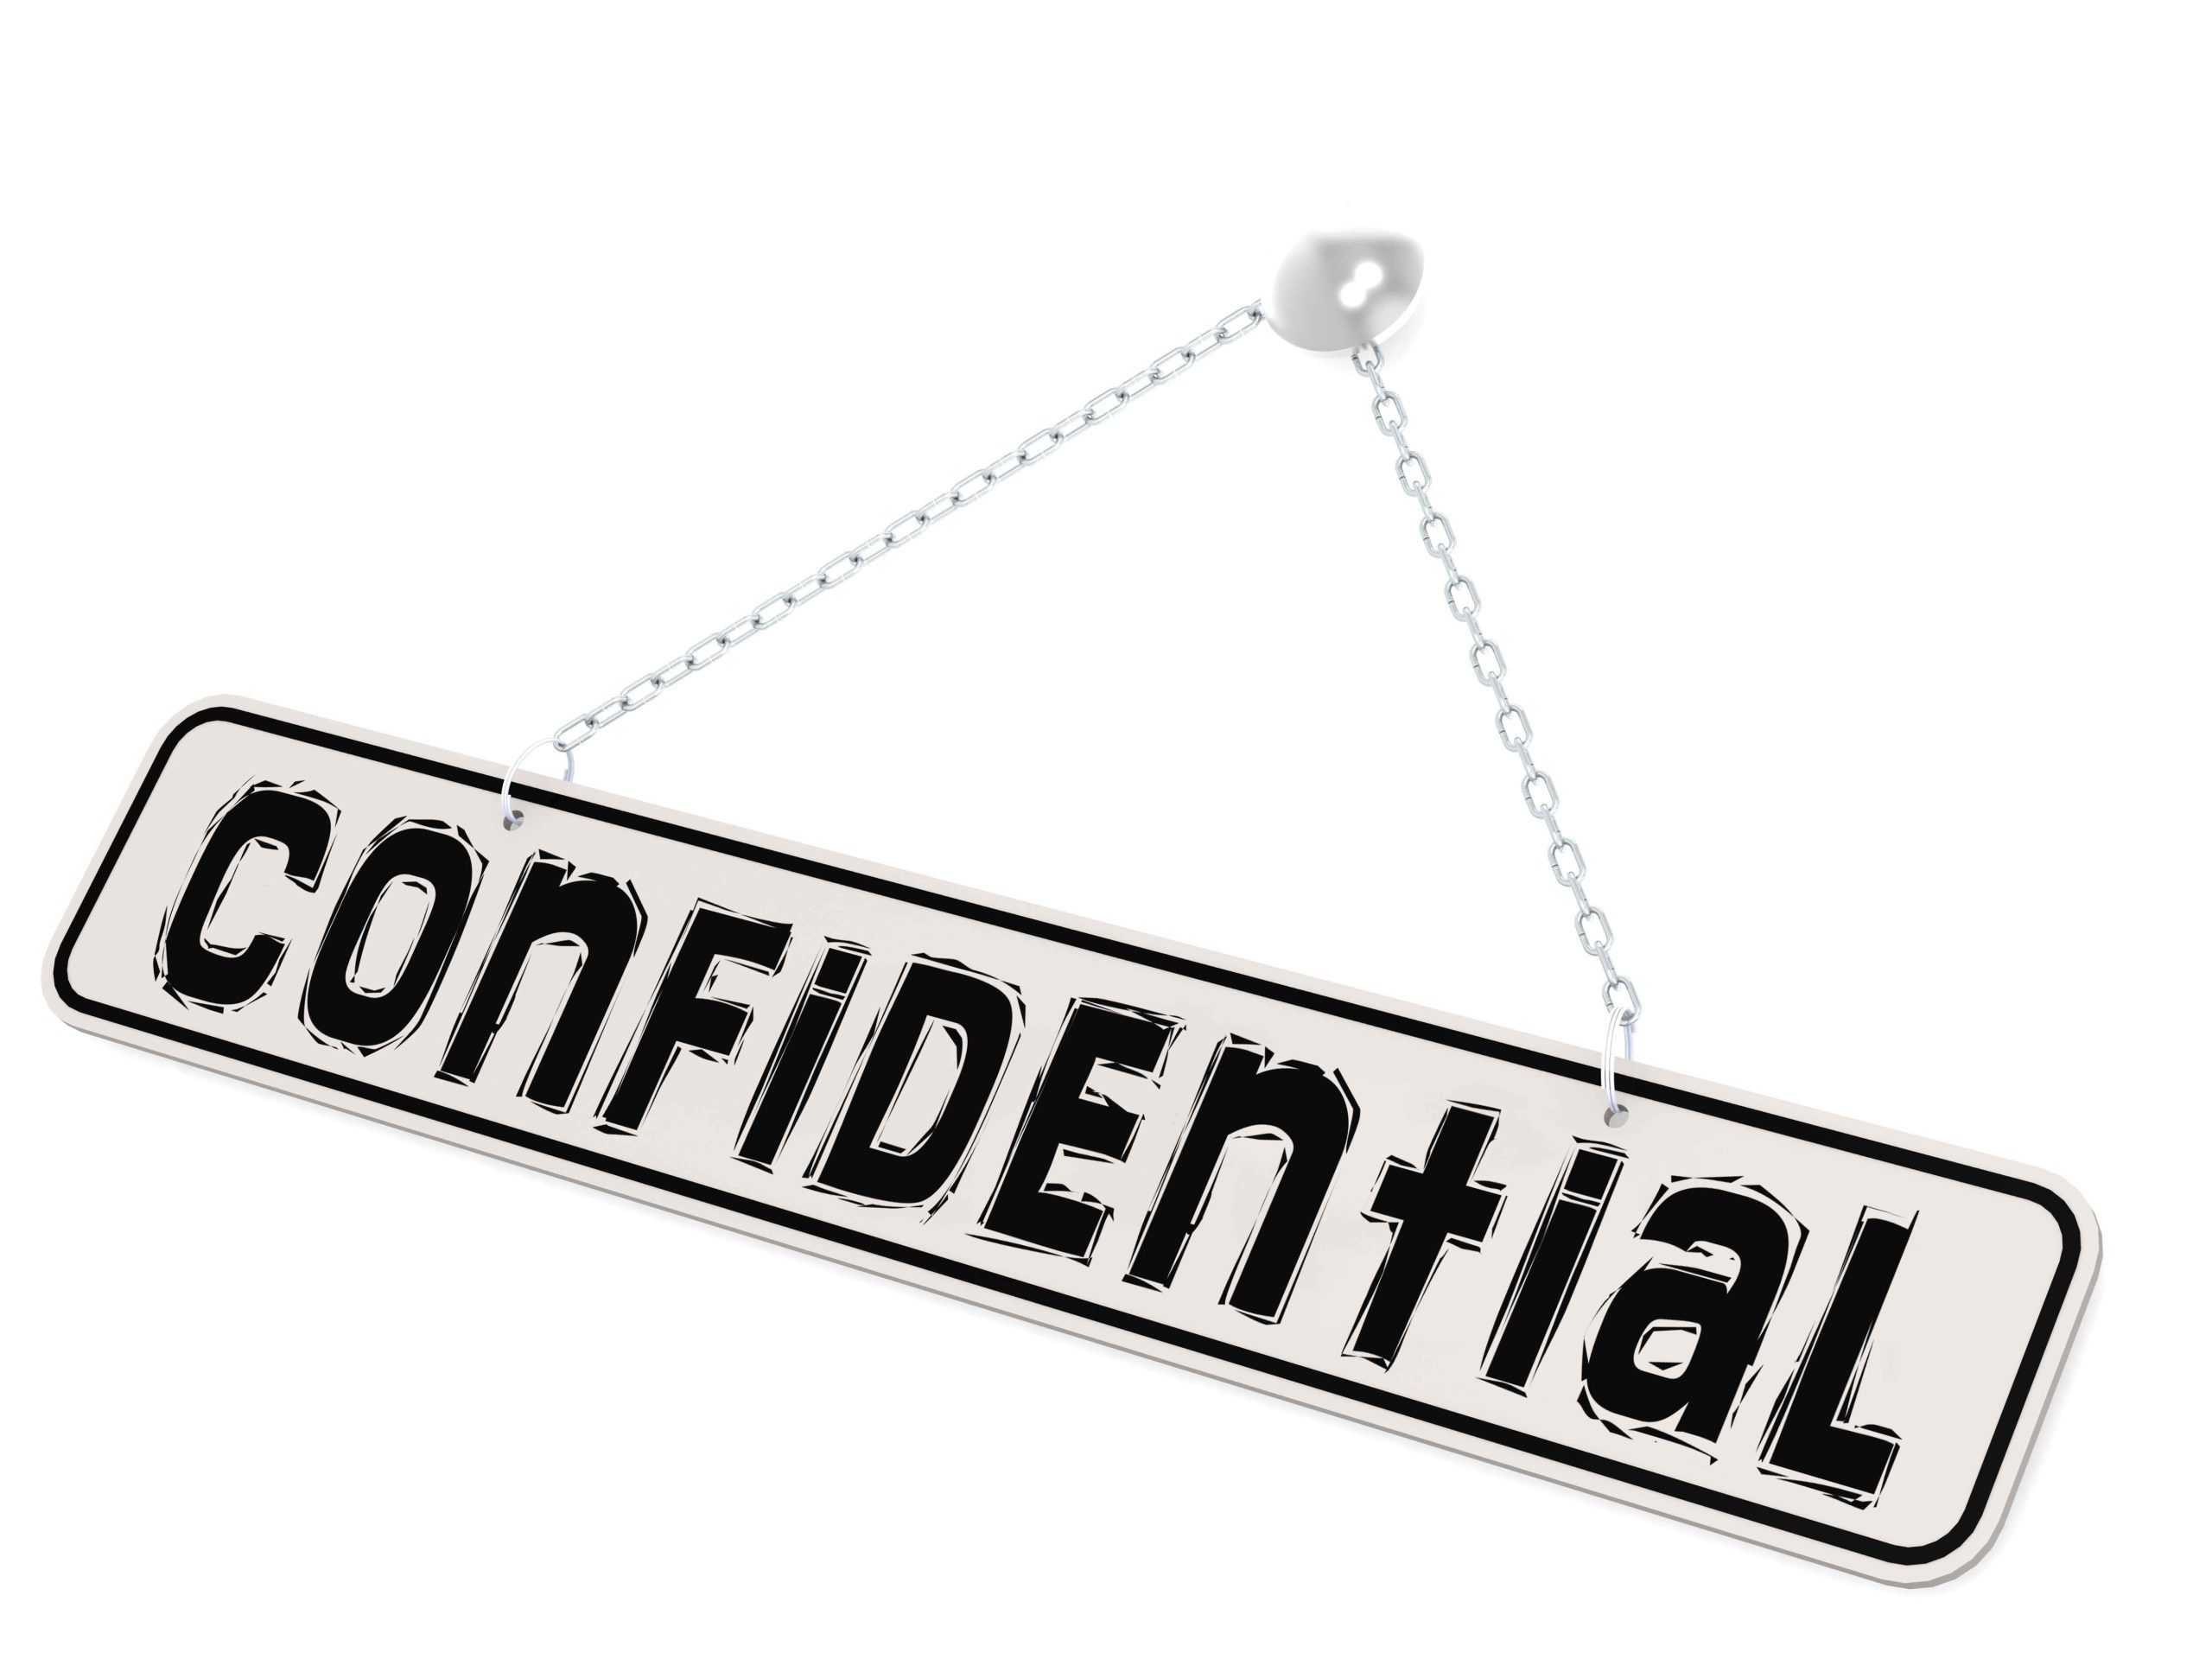 Confidentiality Policy